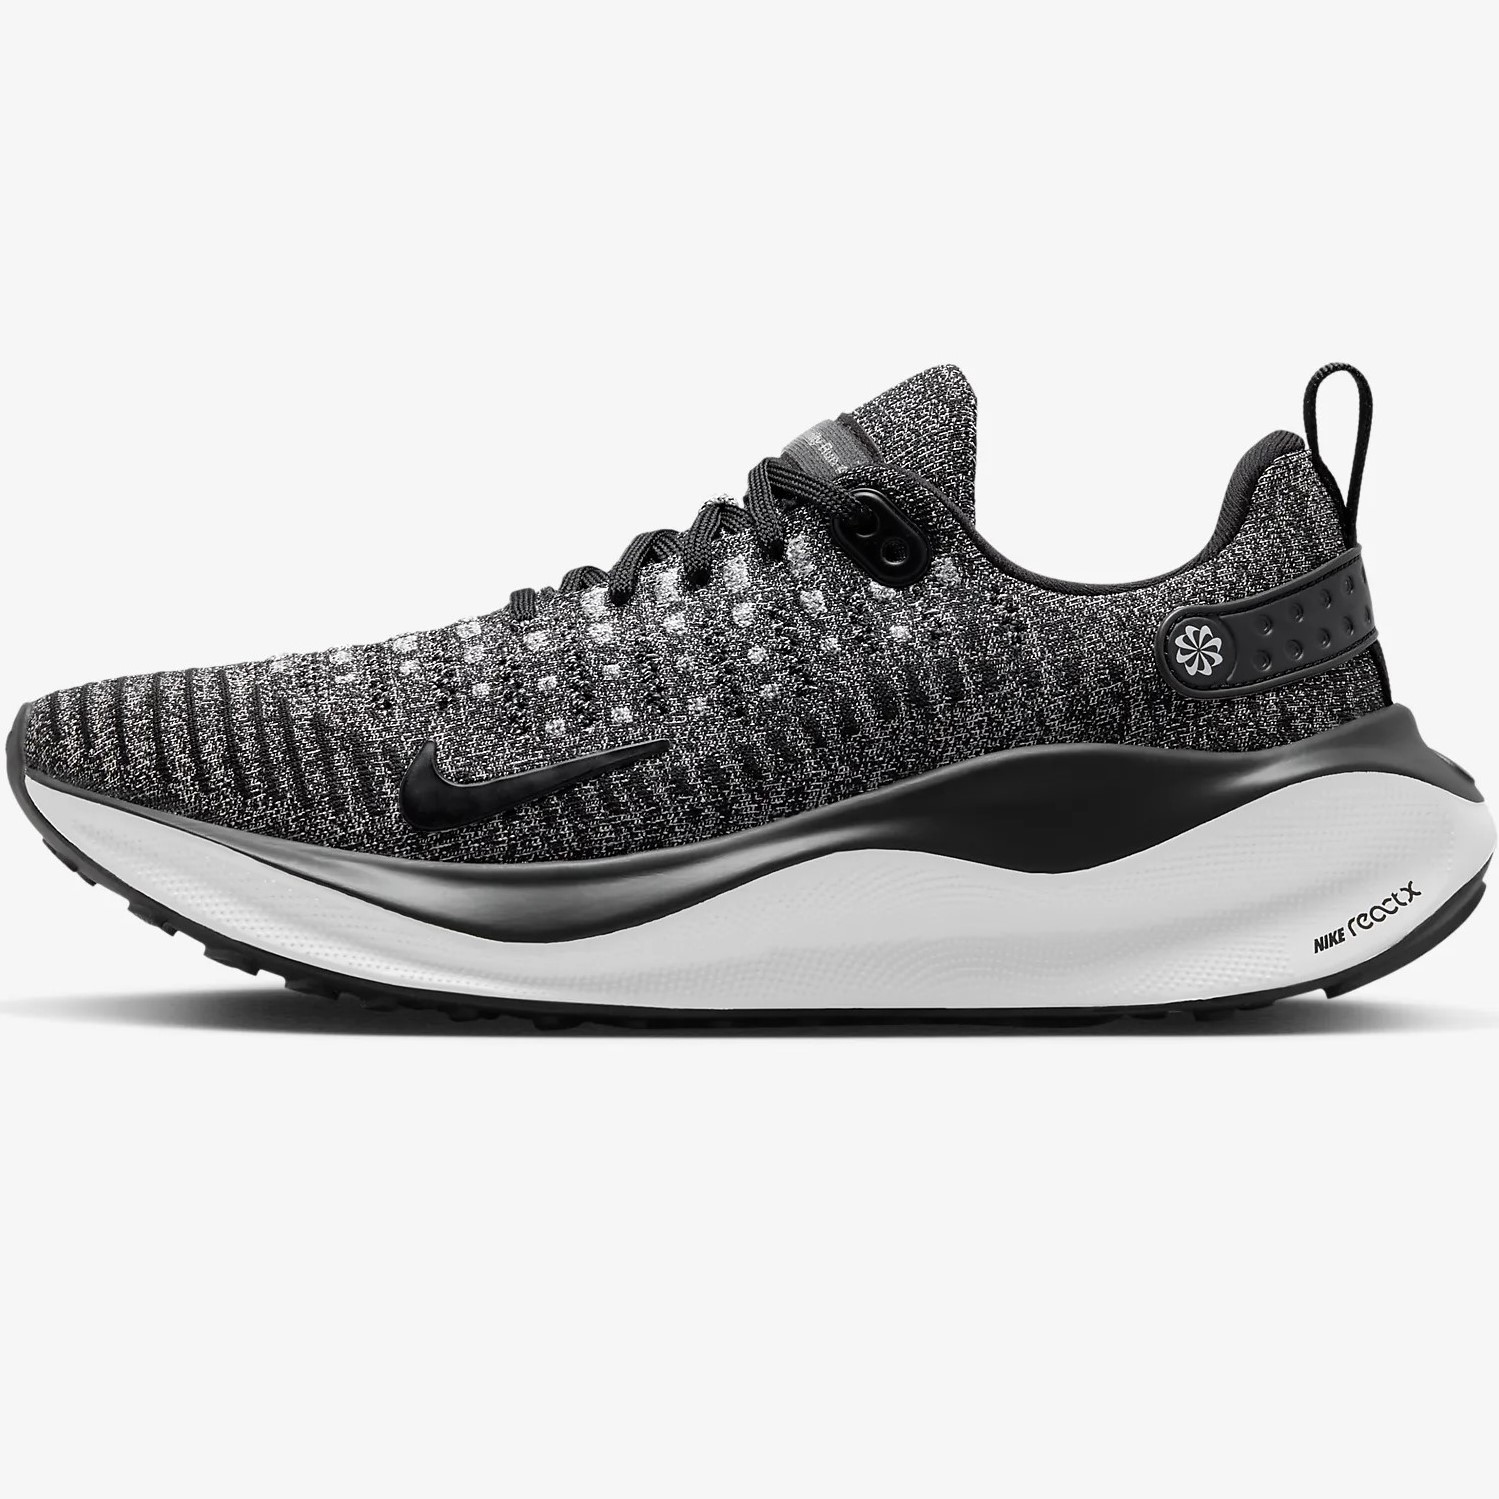 GIÀY THỂ THAO NIKE REACTX INFINITYRN 4 OREO ROAD RUNNING SHOES DR2670-003 6